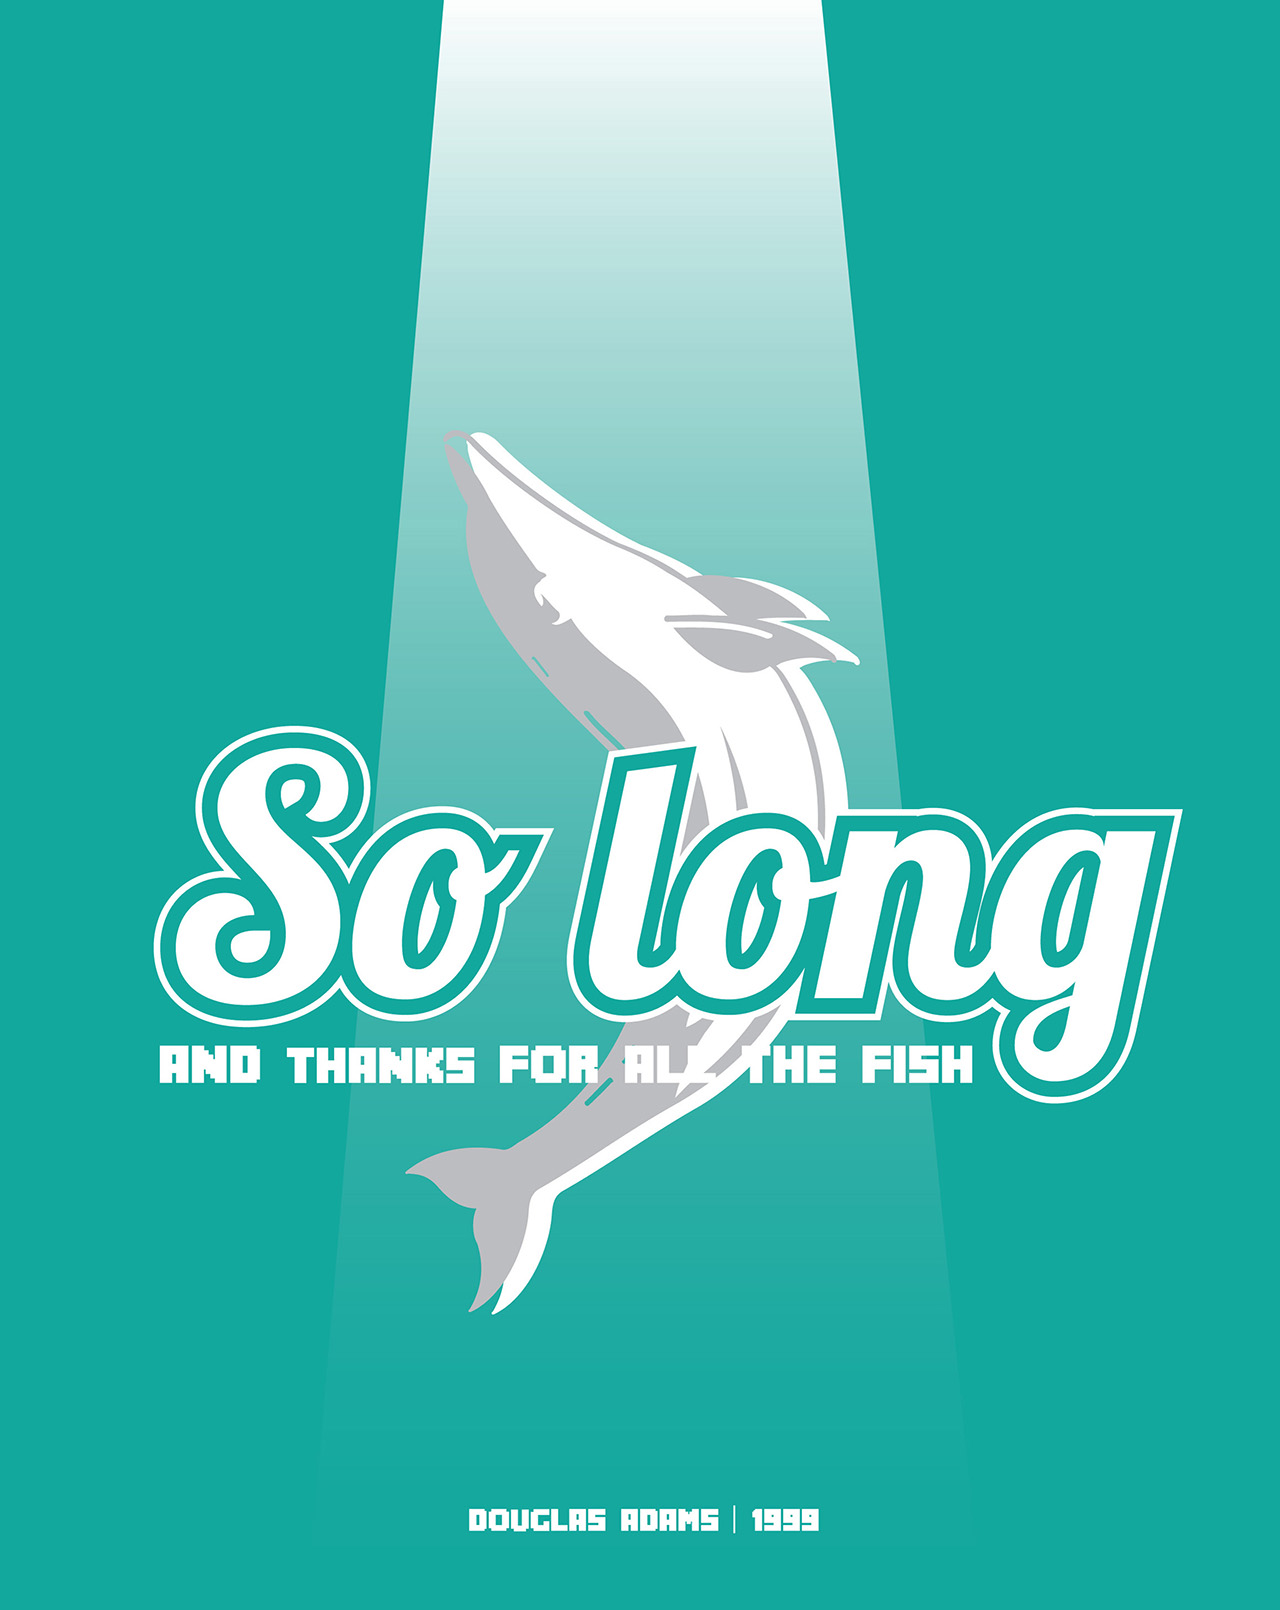 Trent Szente | "So Long, and Thanks for All the Fish" by Douglas Adams